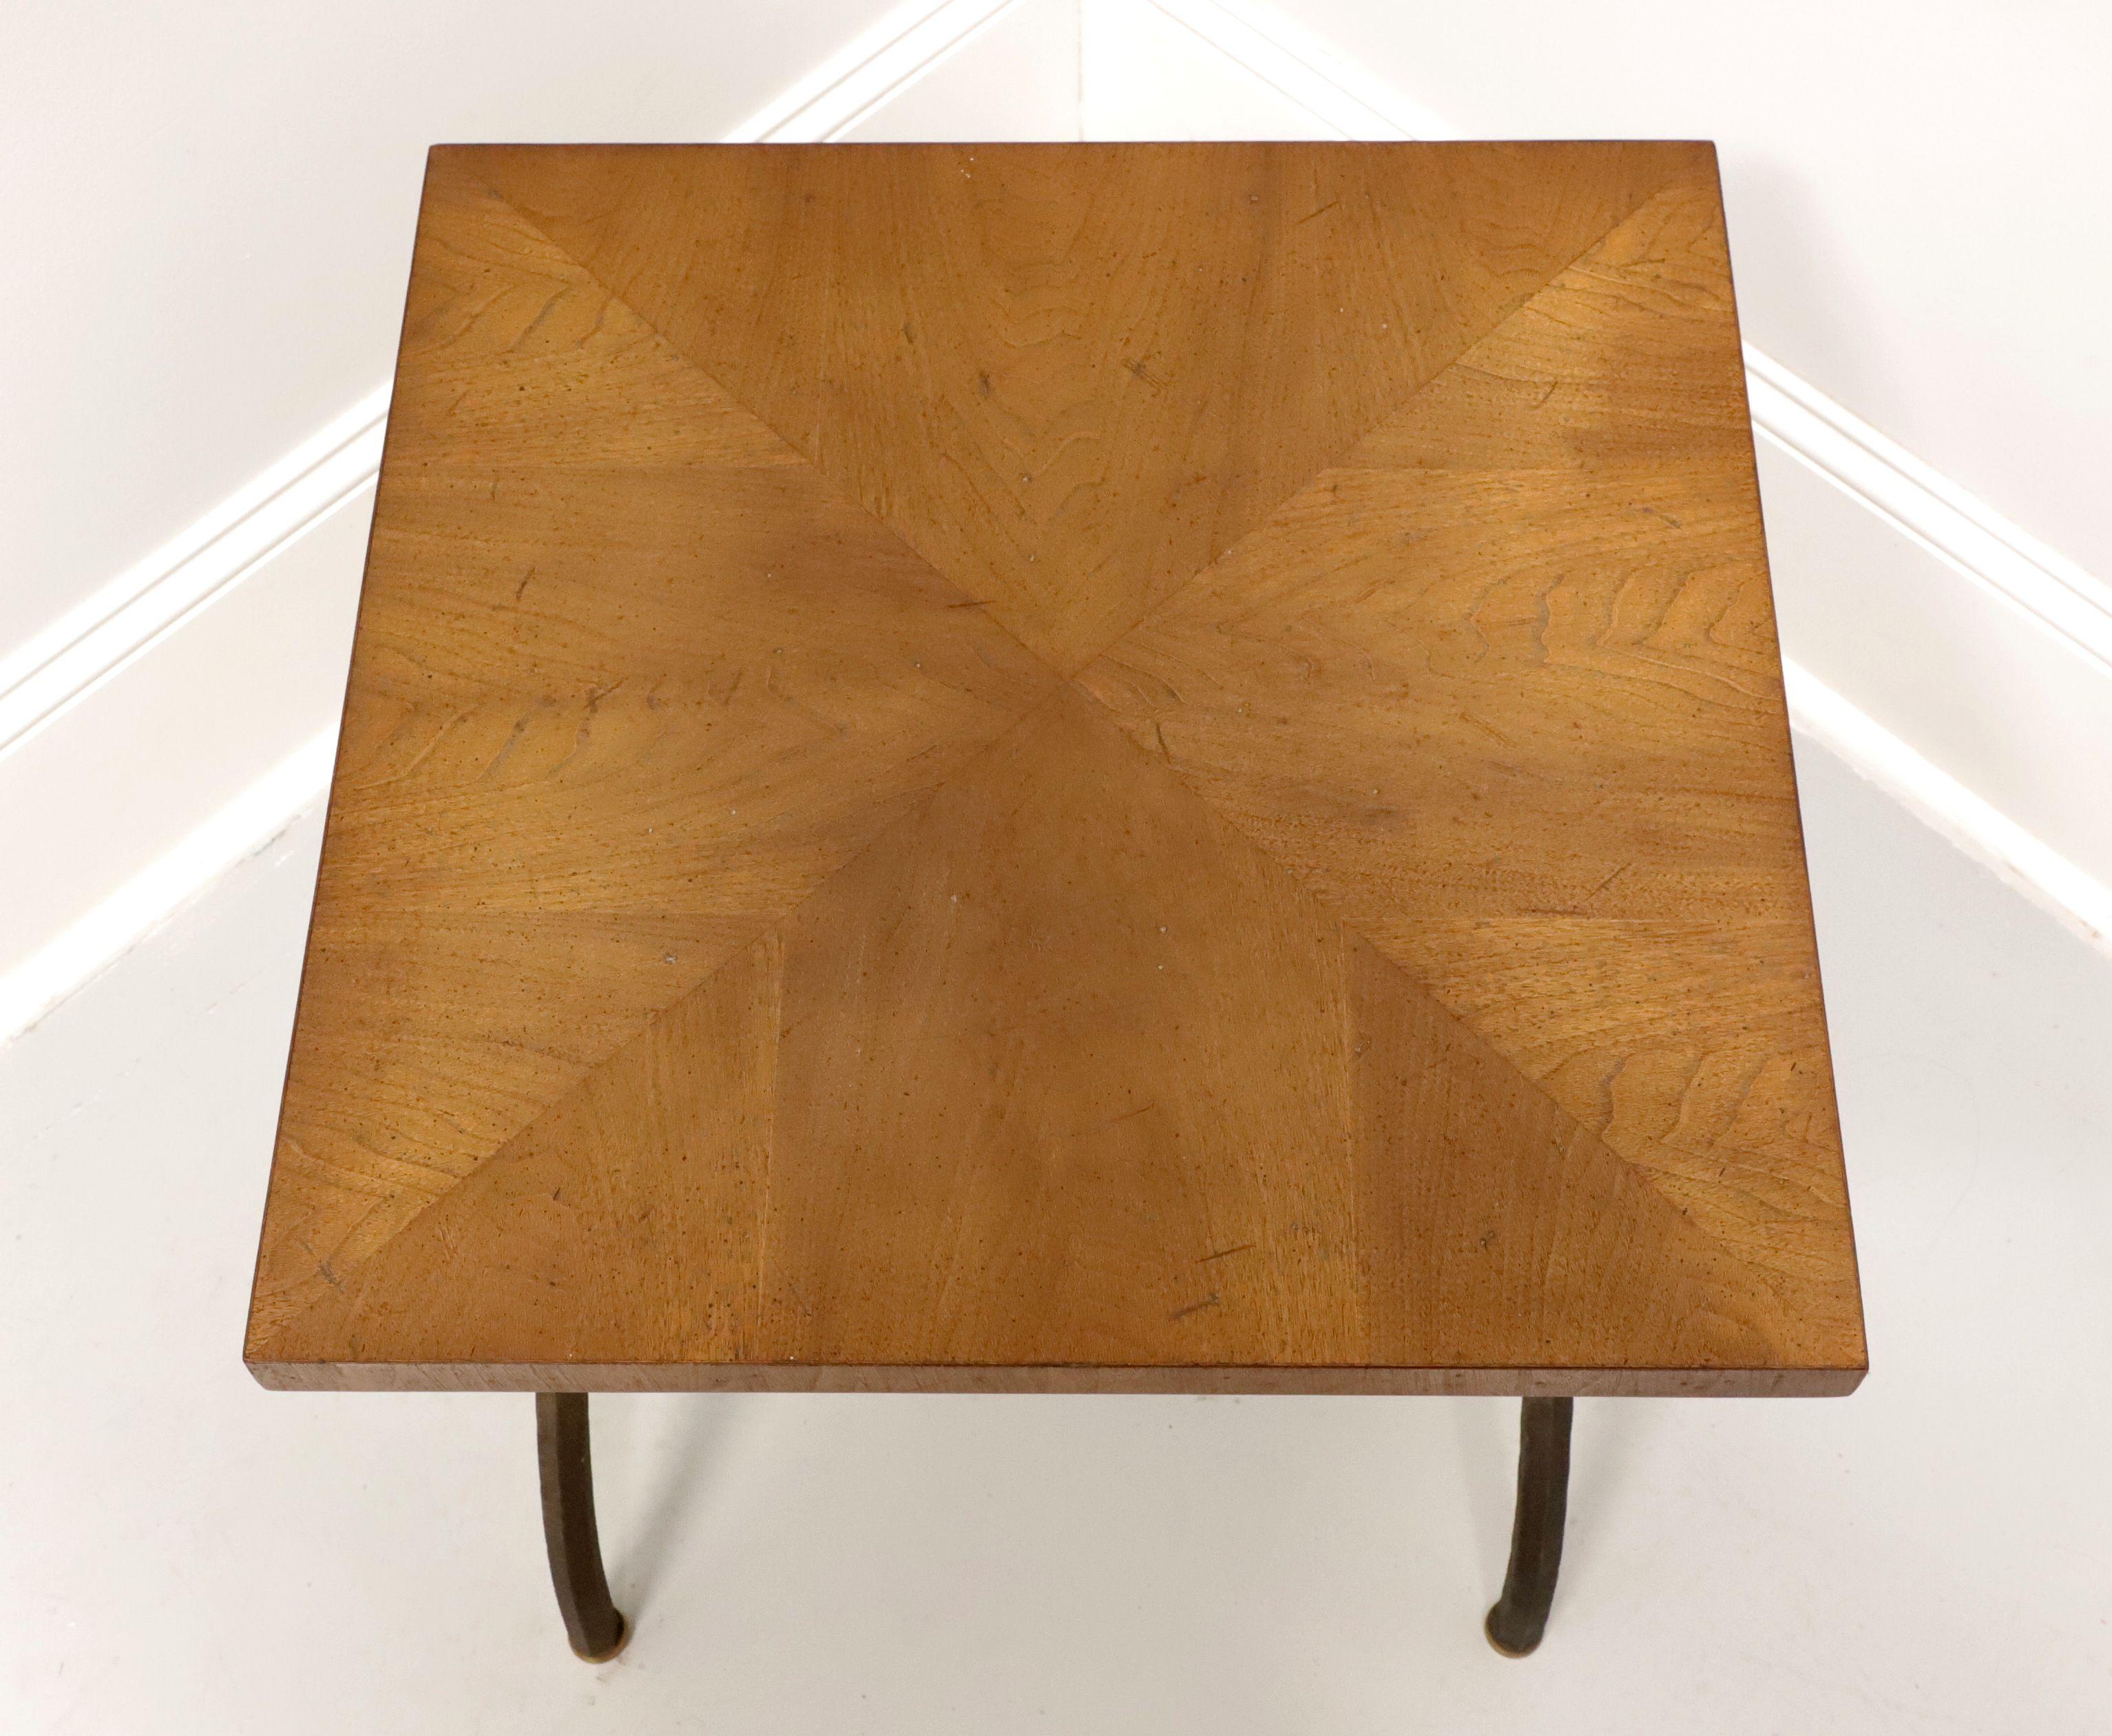 TOMLINSON 1960's Walnut Square Cocktail Table with Metal Legs - B In Good Condition For Sale In Charlotte, NC